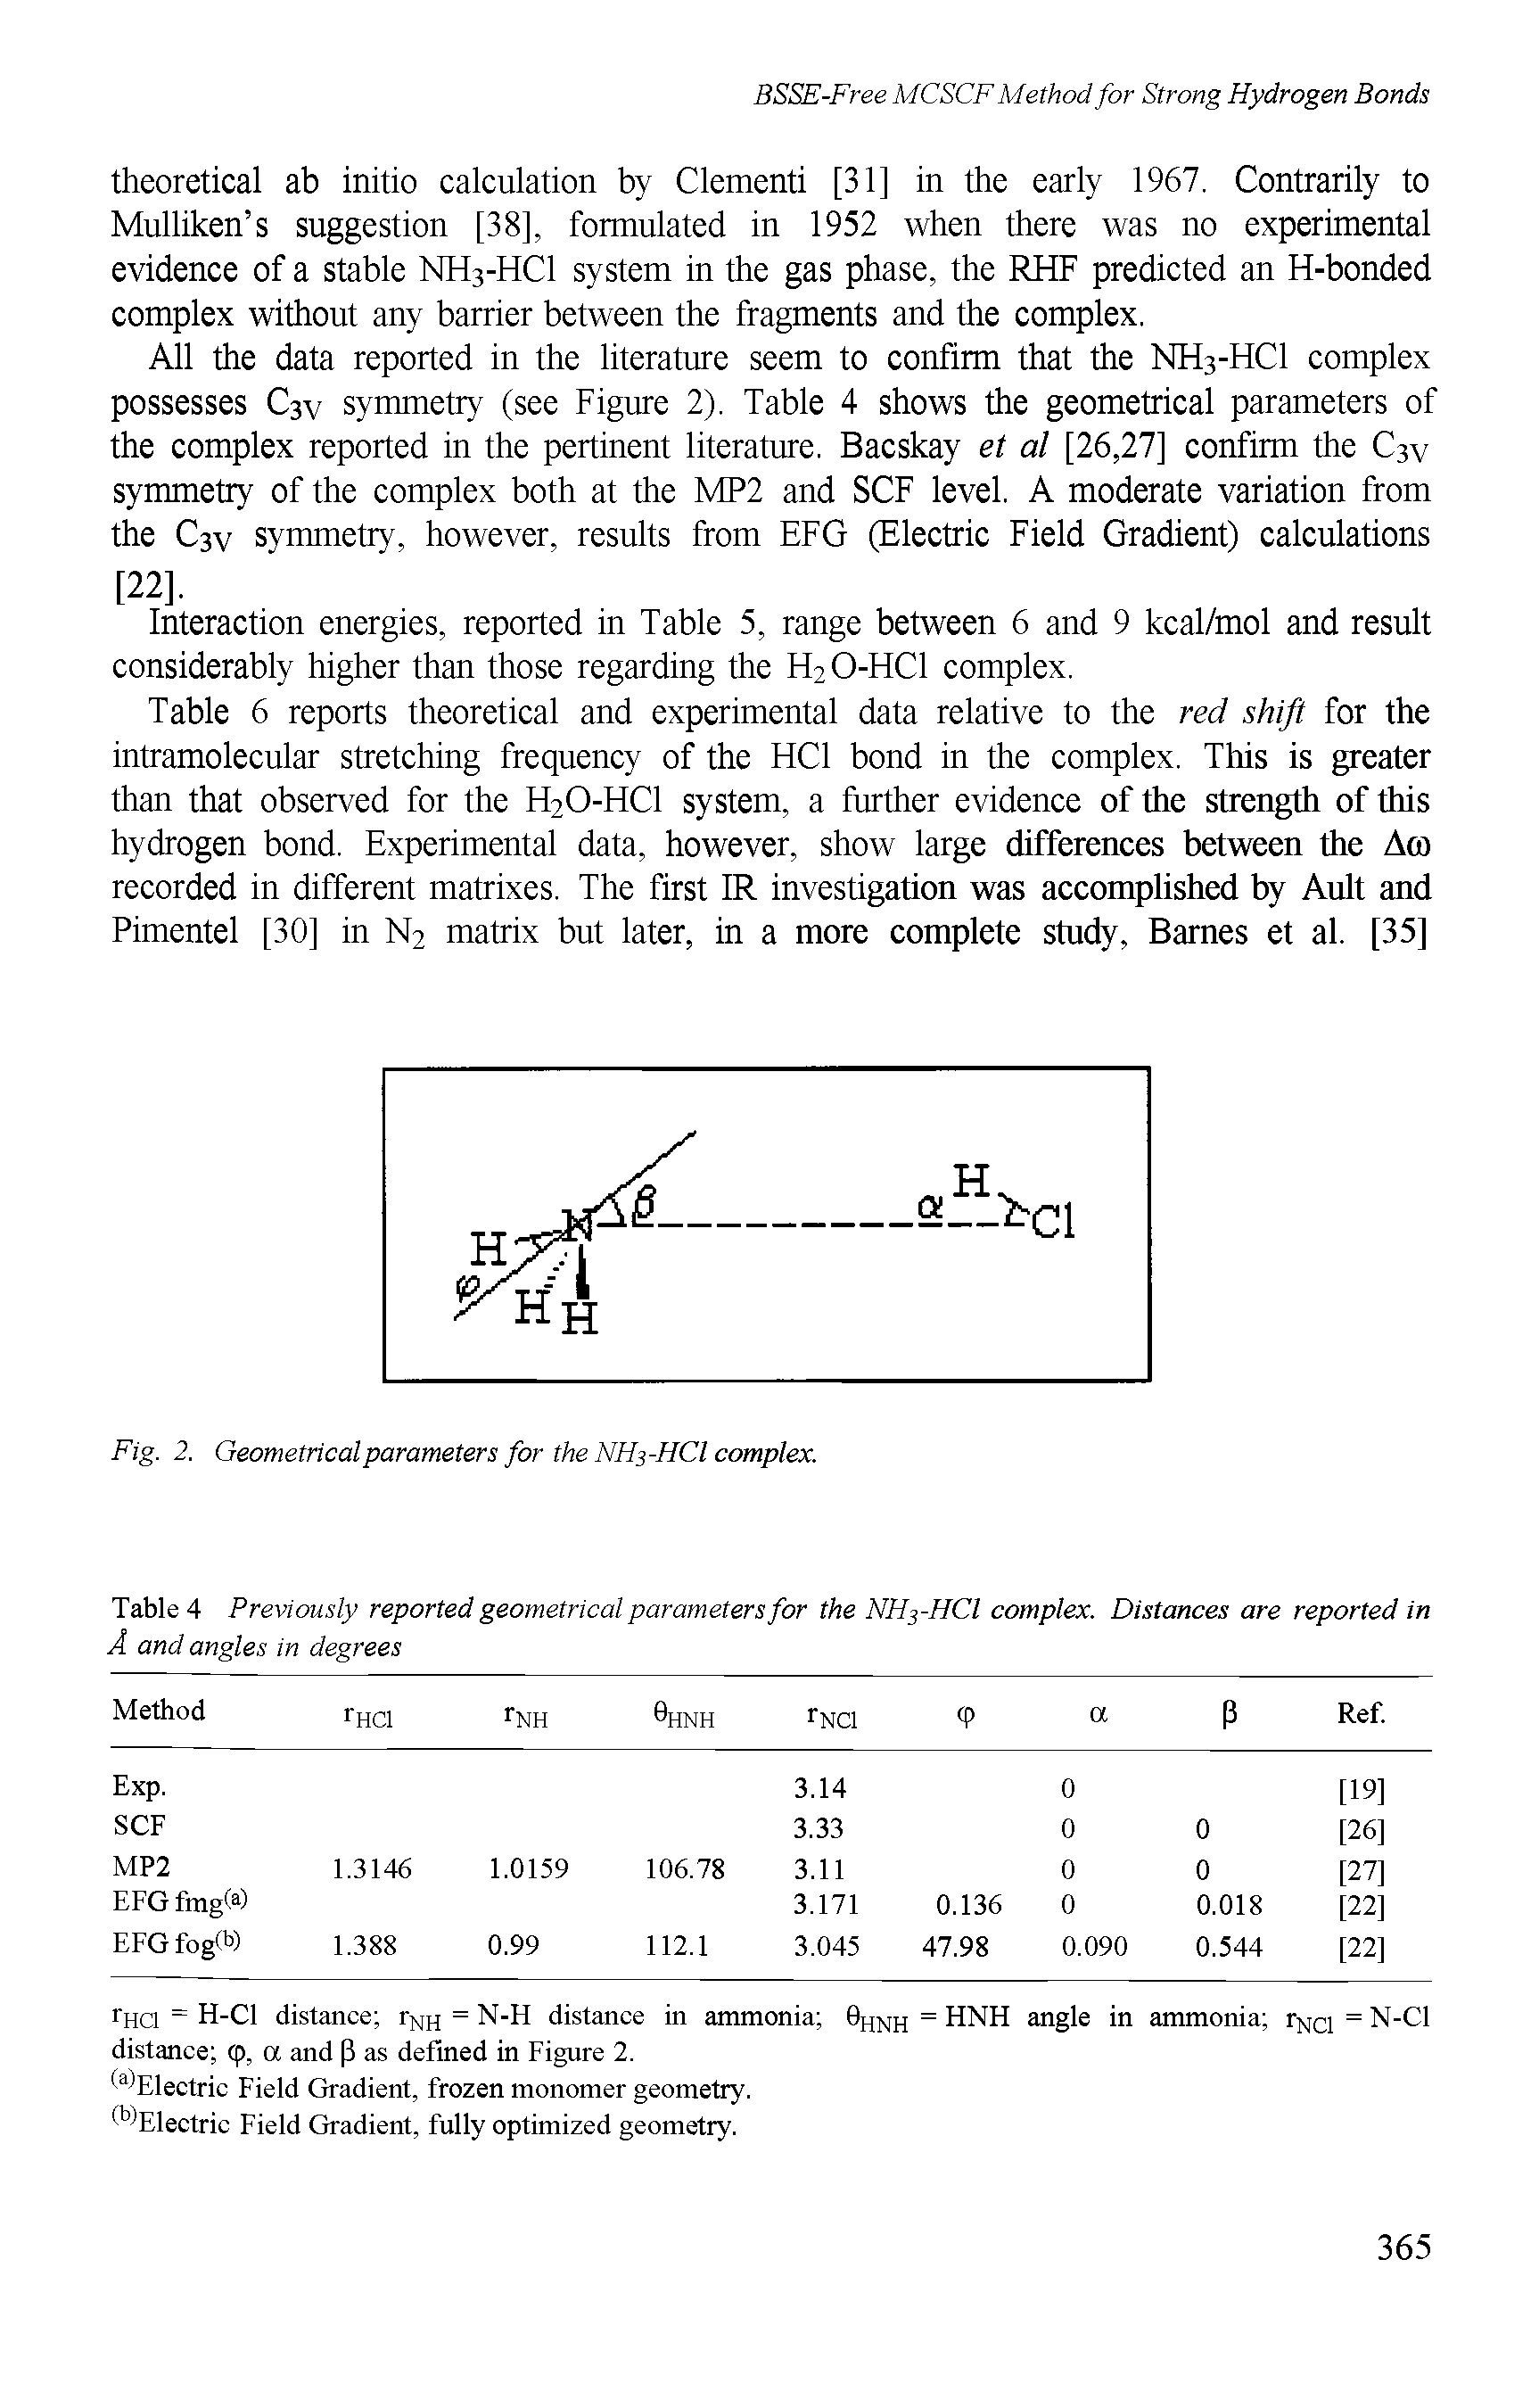 Table 4 Previously reported geometrical parameters for the NH3-HCI complex. Distances are reported in A and angles in degrees...